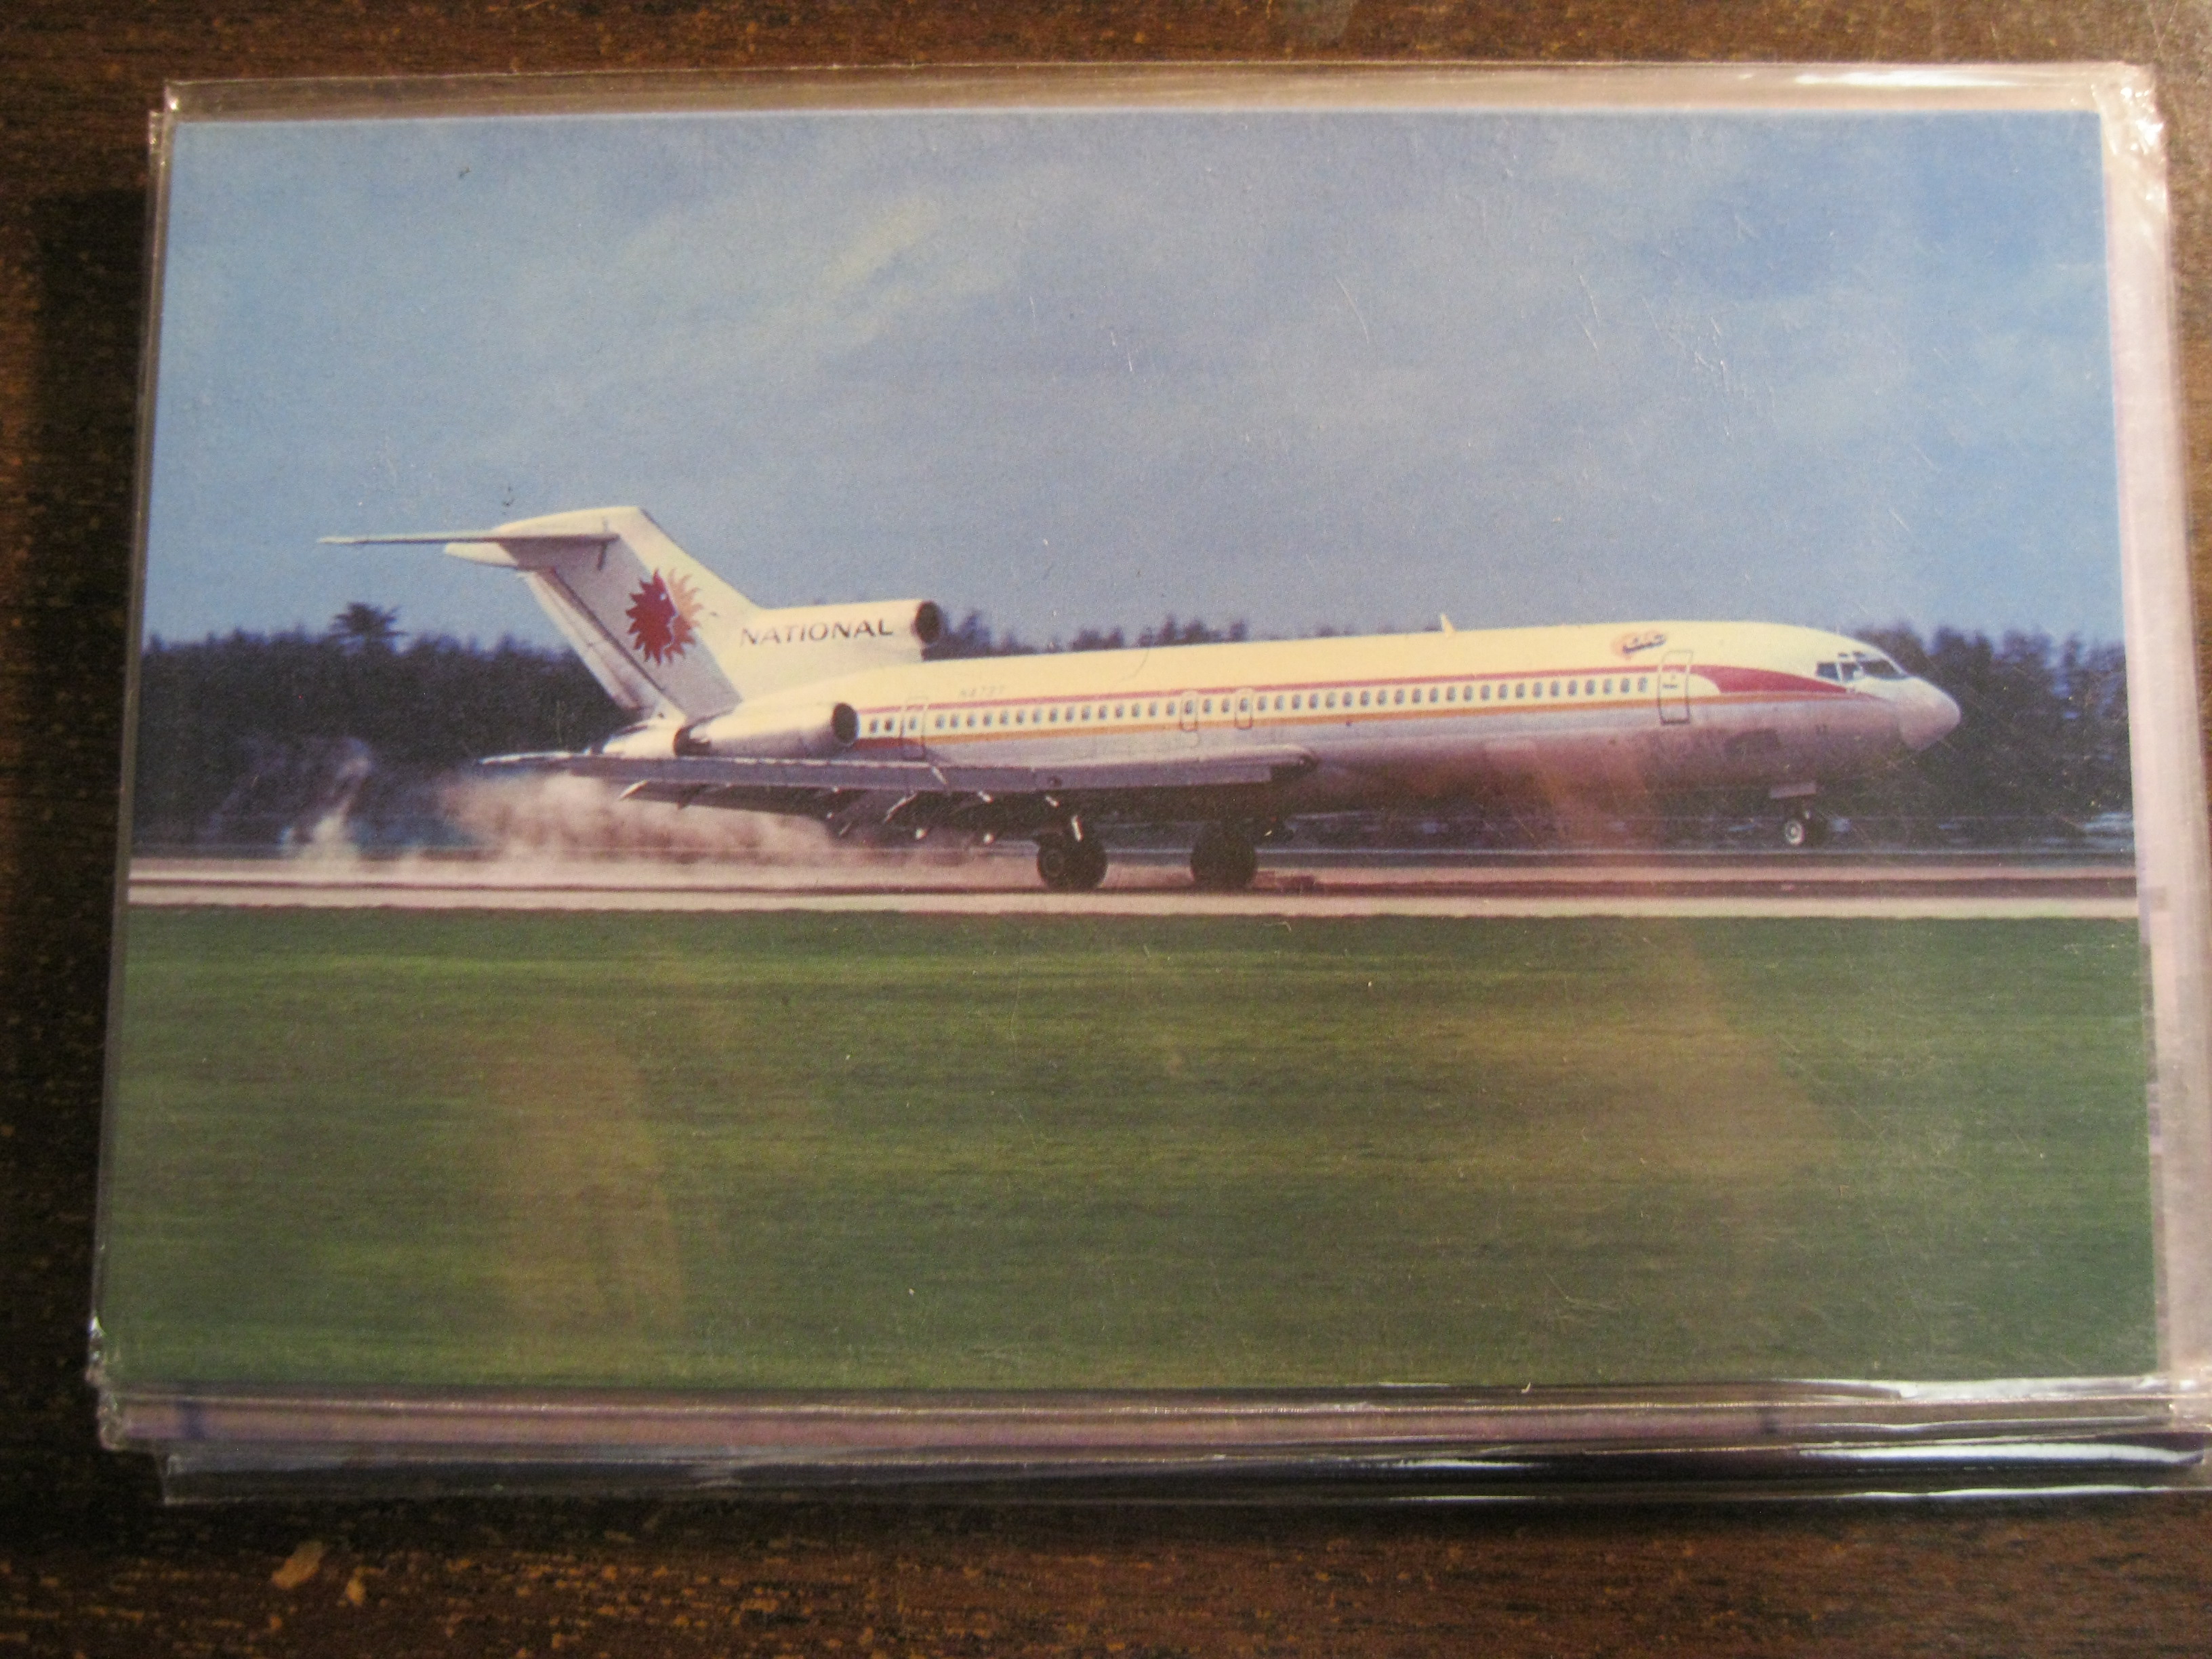 National Airlines Boeing 727 post card 69